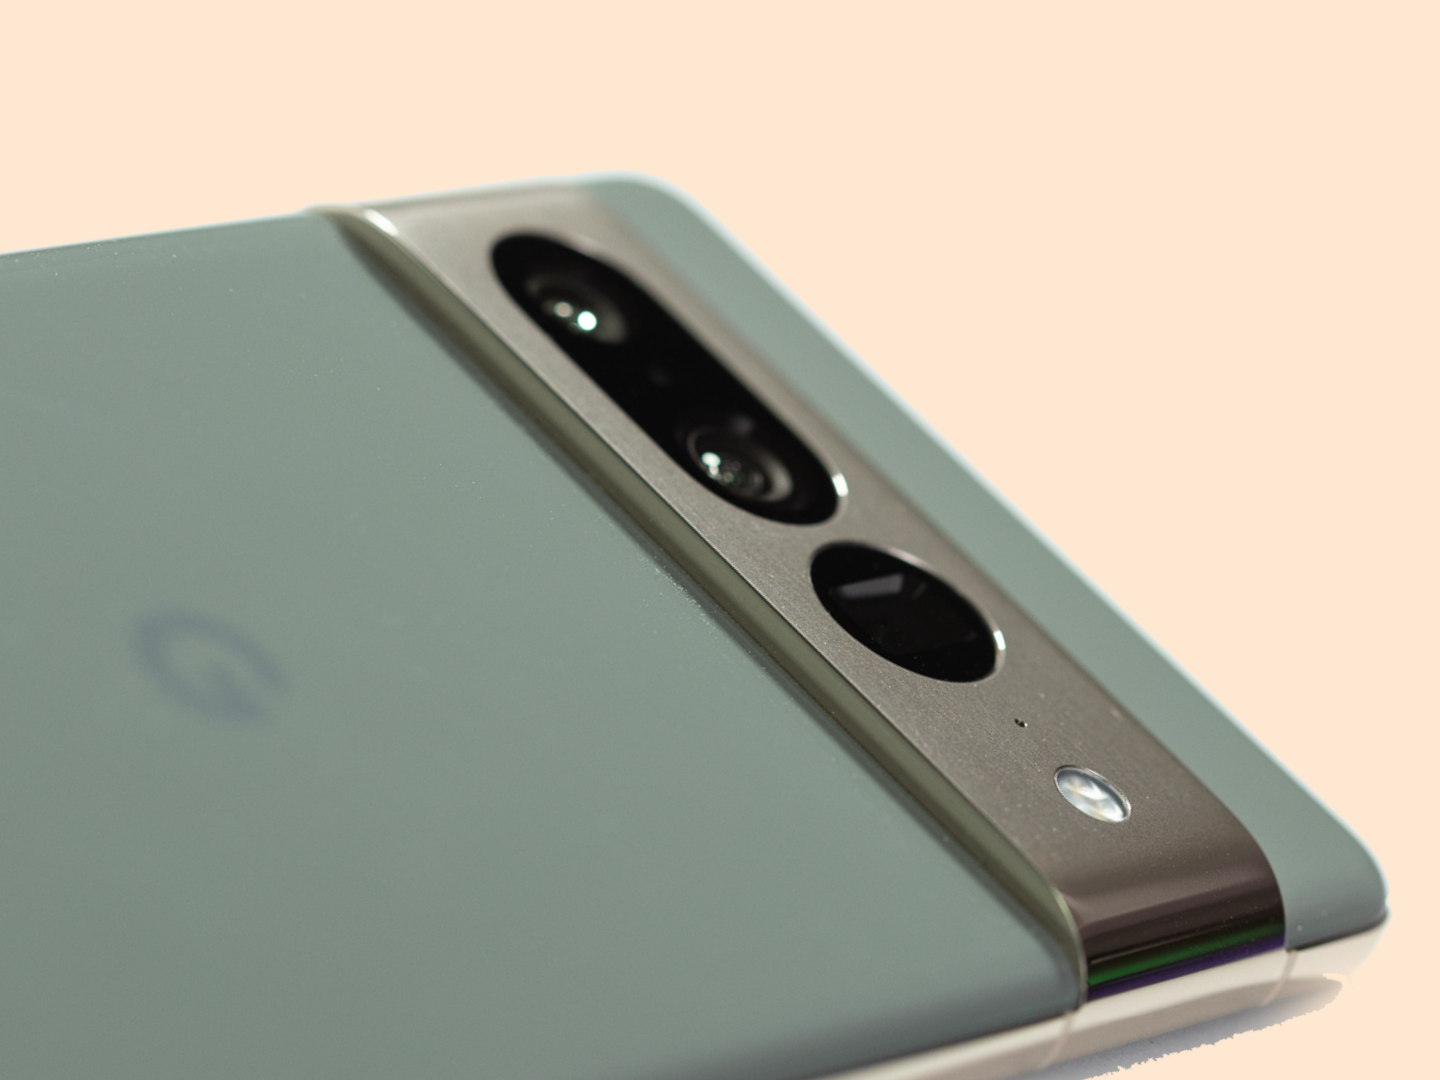 As of now, only the last two series of Pixel flagships are planned to get Spatial Audio. - Google shares details about upcoming Spatial Audio for Pixel phones and buds